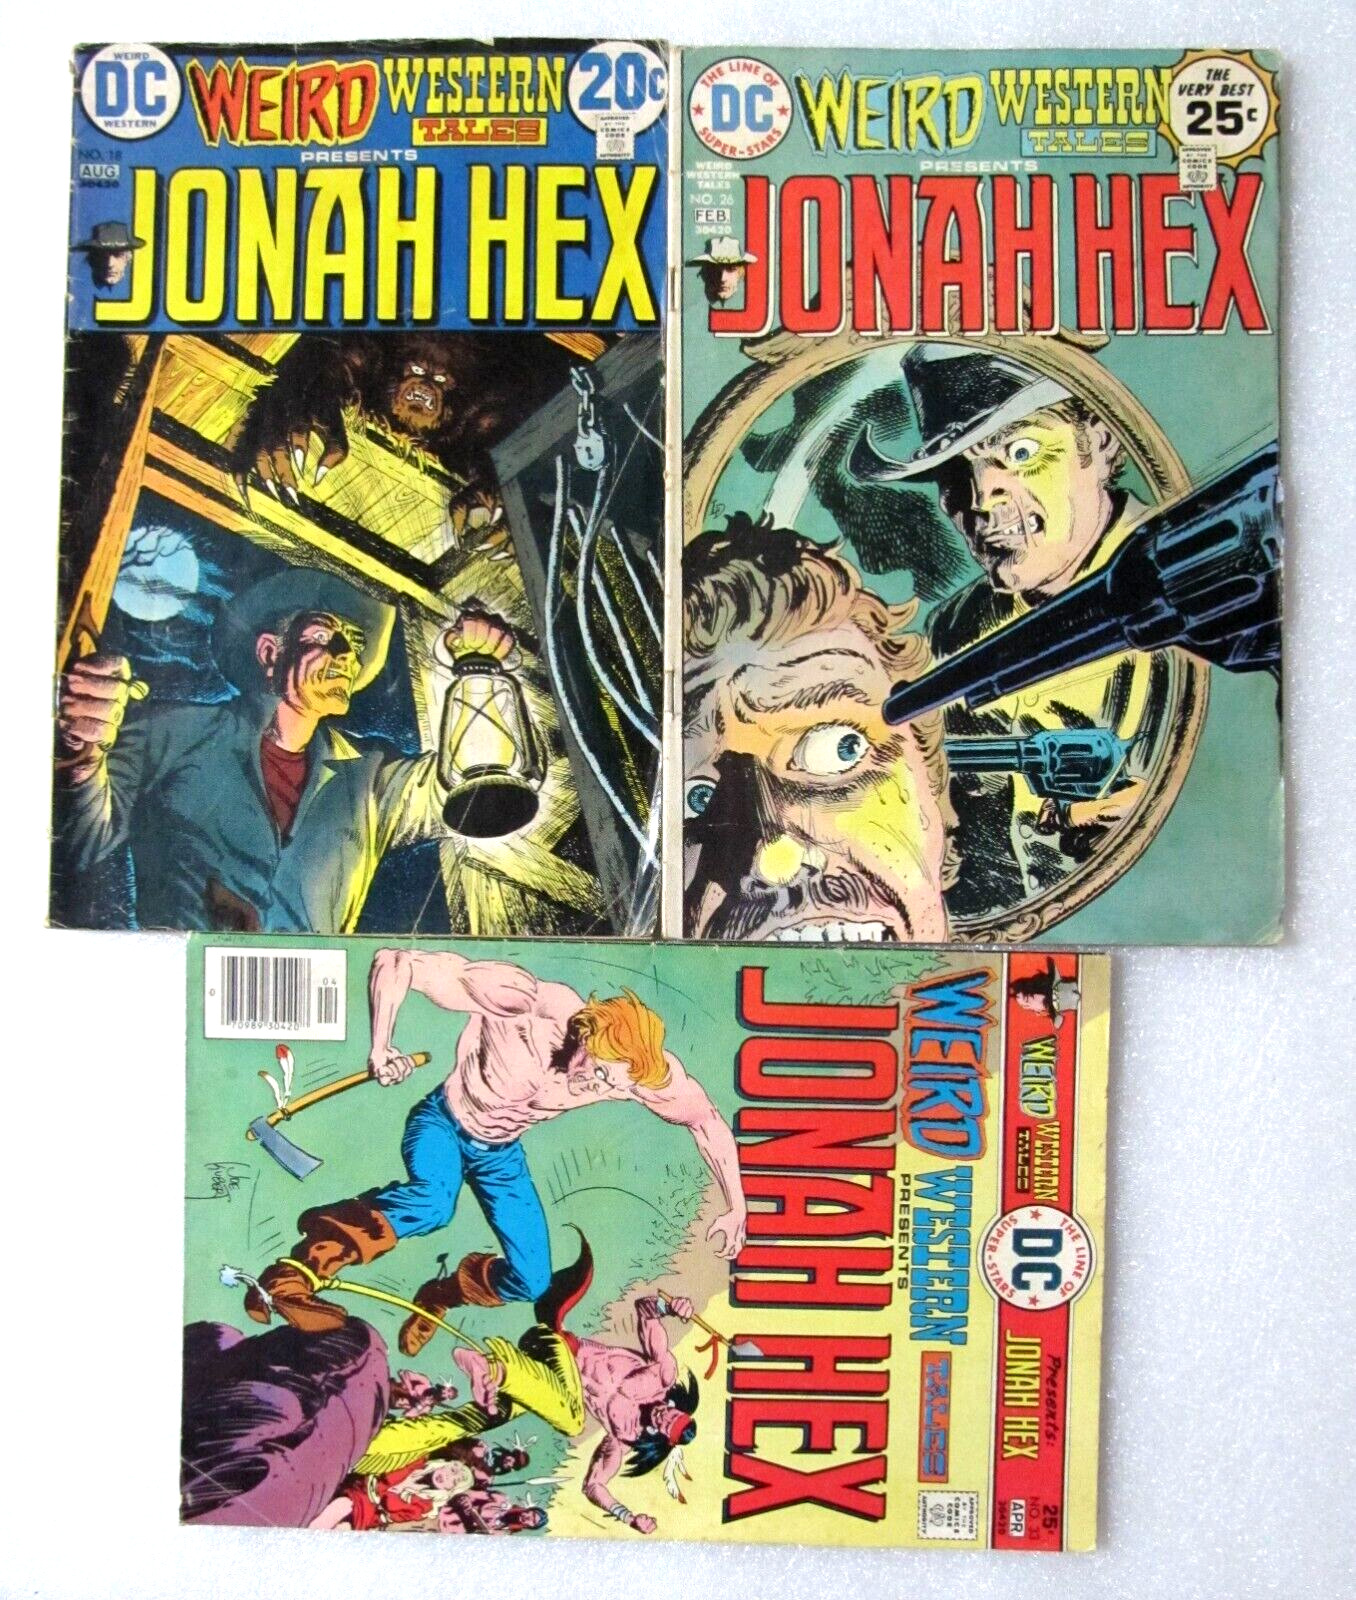 LOT OF 3 WEIRD WESTERN TALES JONAH HEX #18 #26 #33 DC BRONZE AGE COMIC - BAGGED